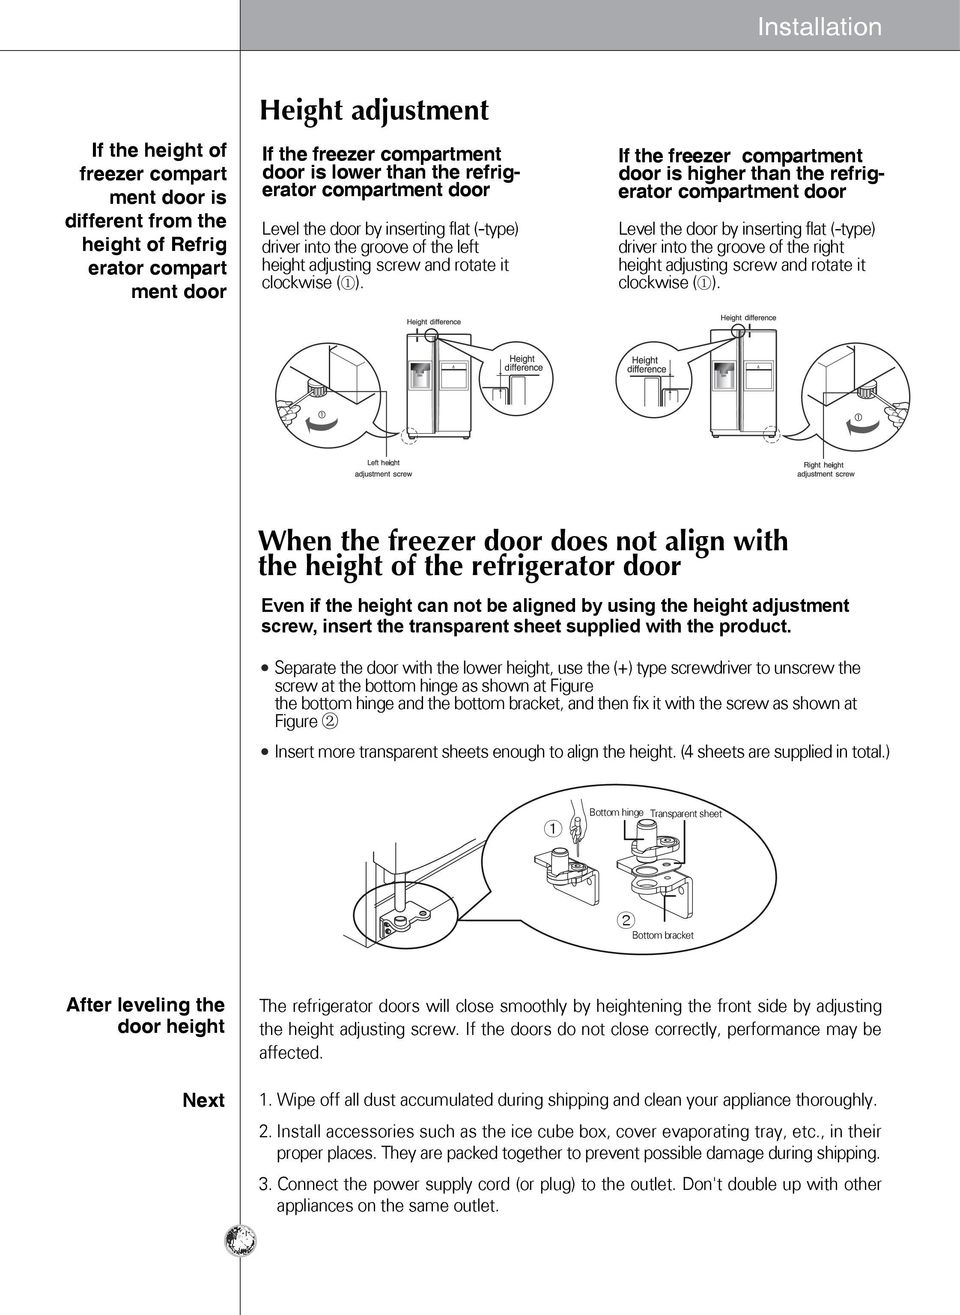 If the freezer compartment door is higher than the refrigerator compartment door Level the door by inserting flat (-type) driver into the groove of the right height adjusting screw and rotate it